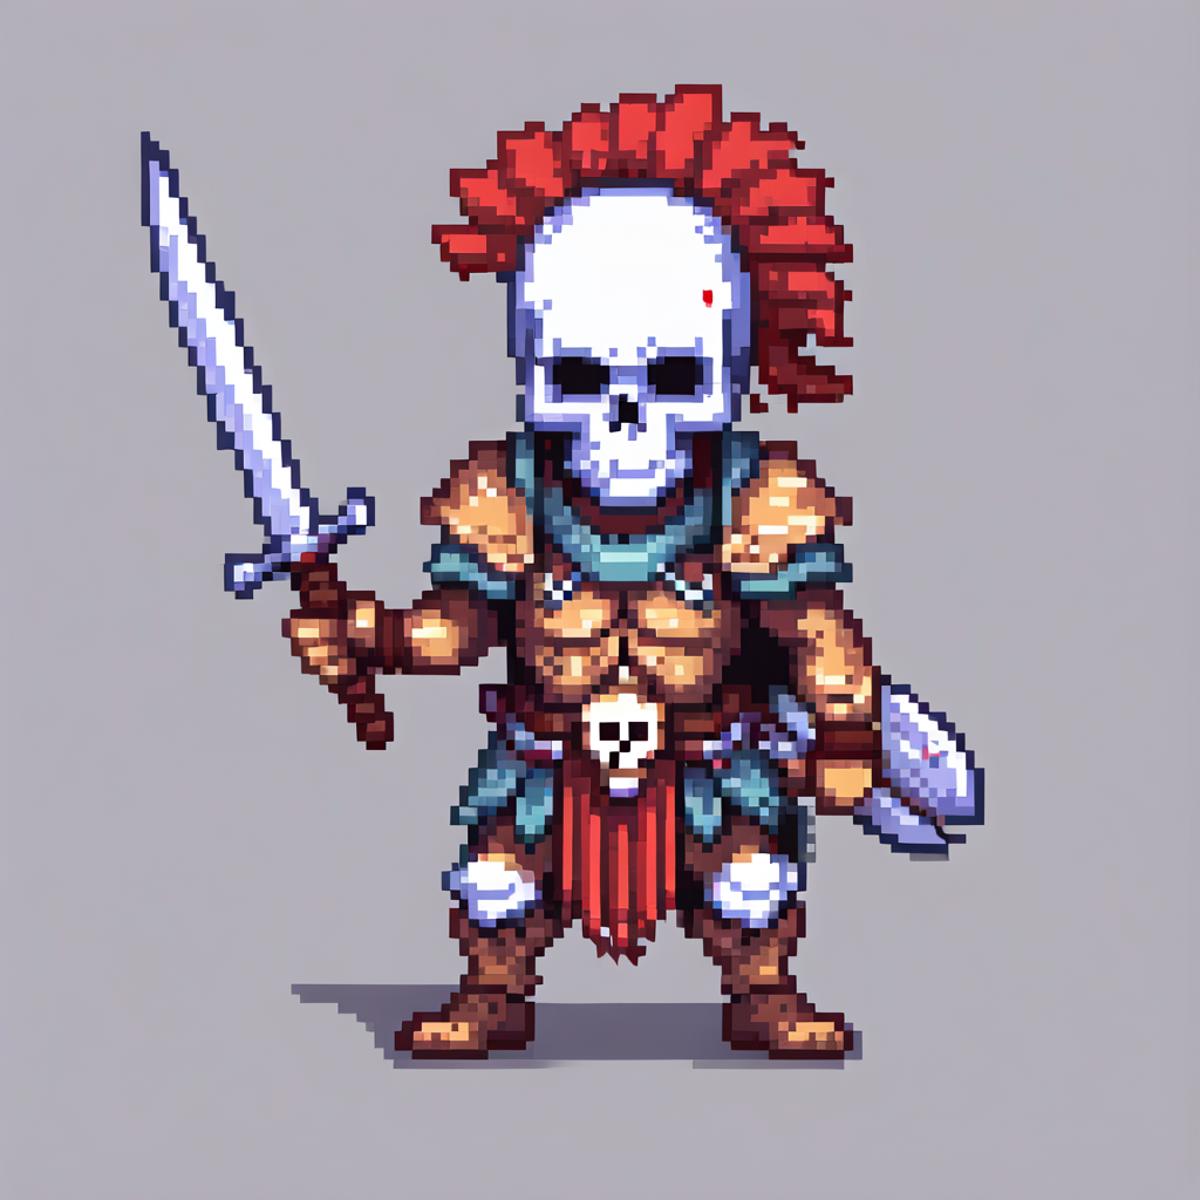 A warrior with a skull head and red hair holding a sword and shield.